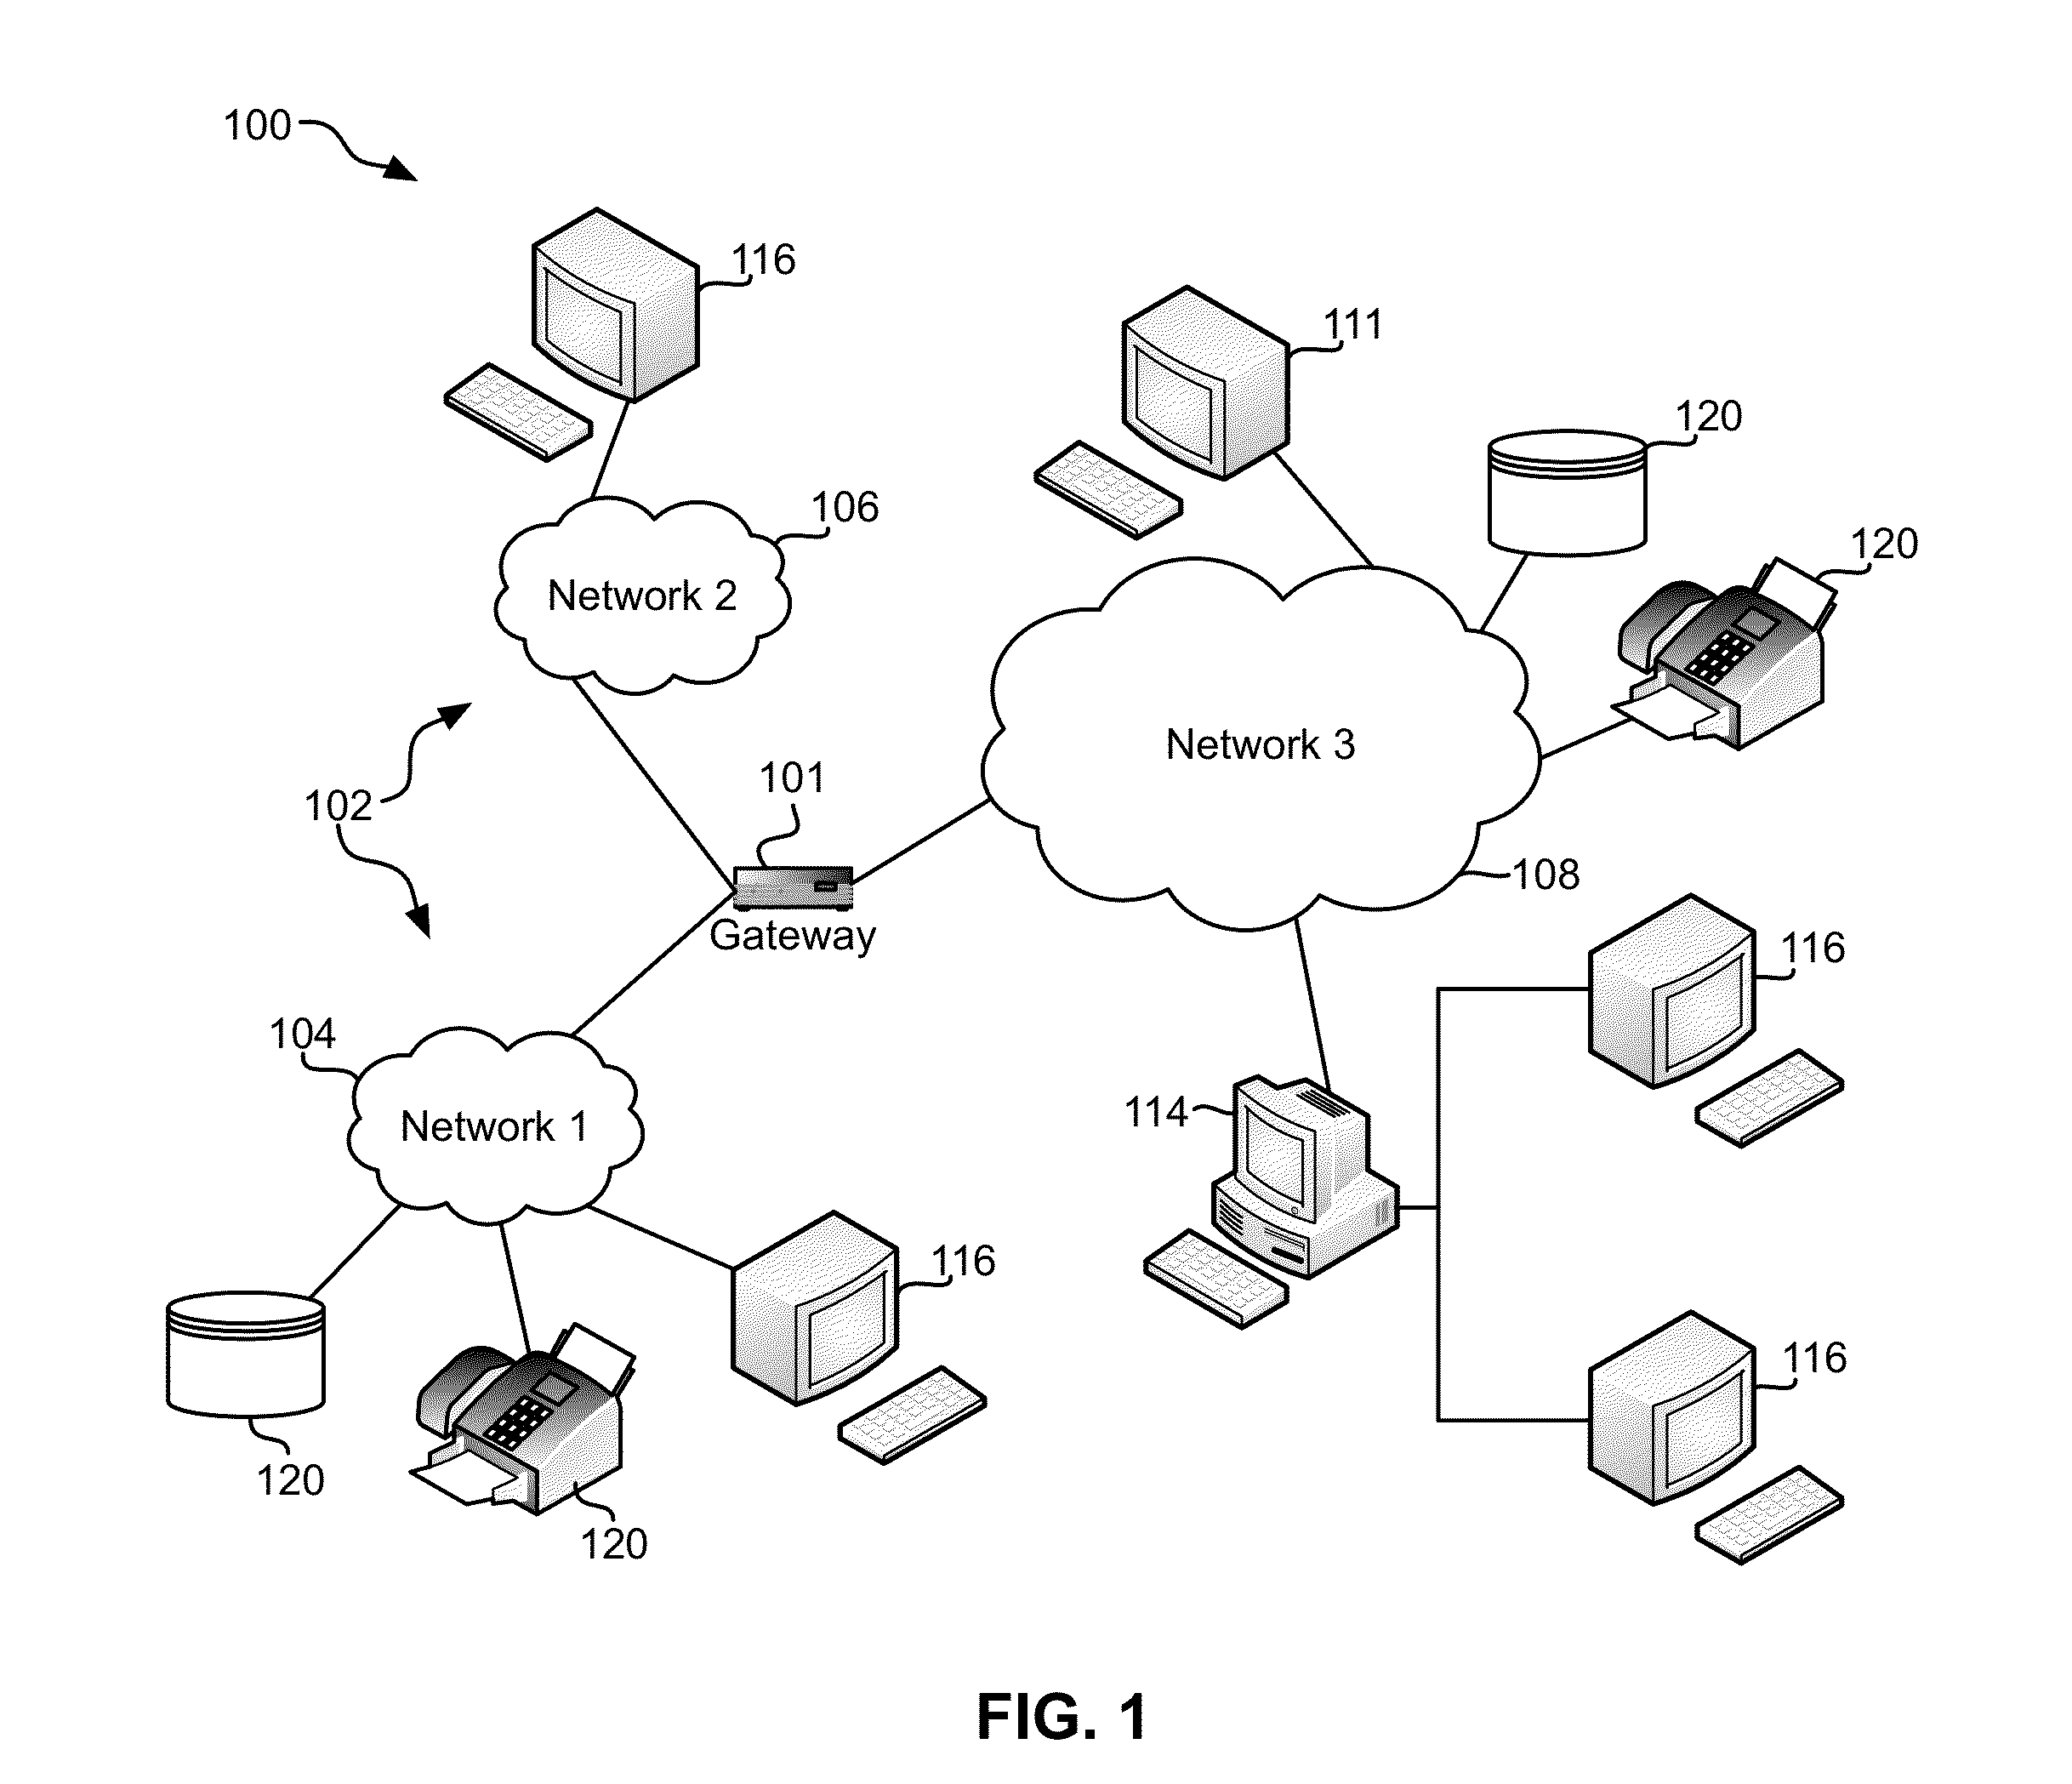 Systems and methods for classifying objects in digital images captured using mobile devices